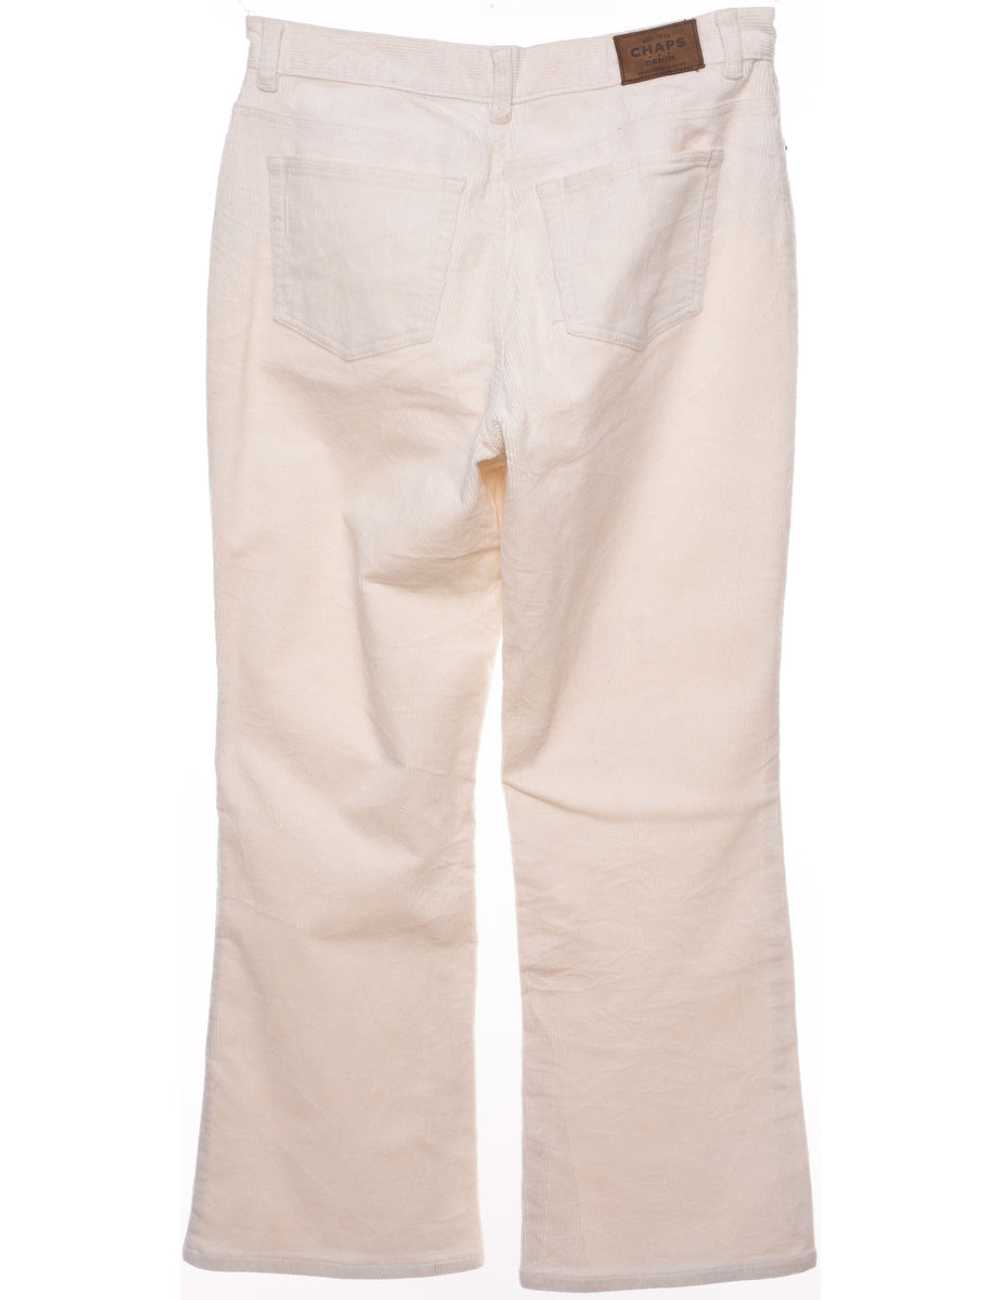 Chaps Off-White 1990s Corduroy Trousers - W31 L28 - image 2